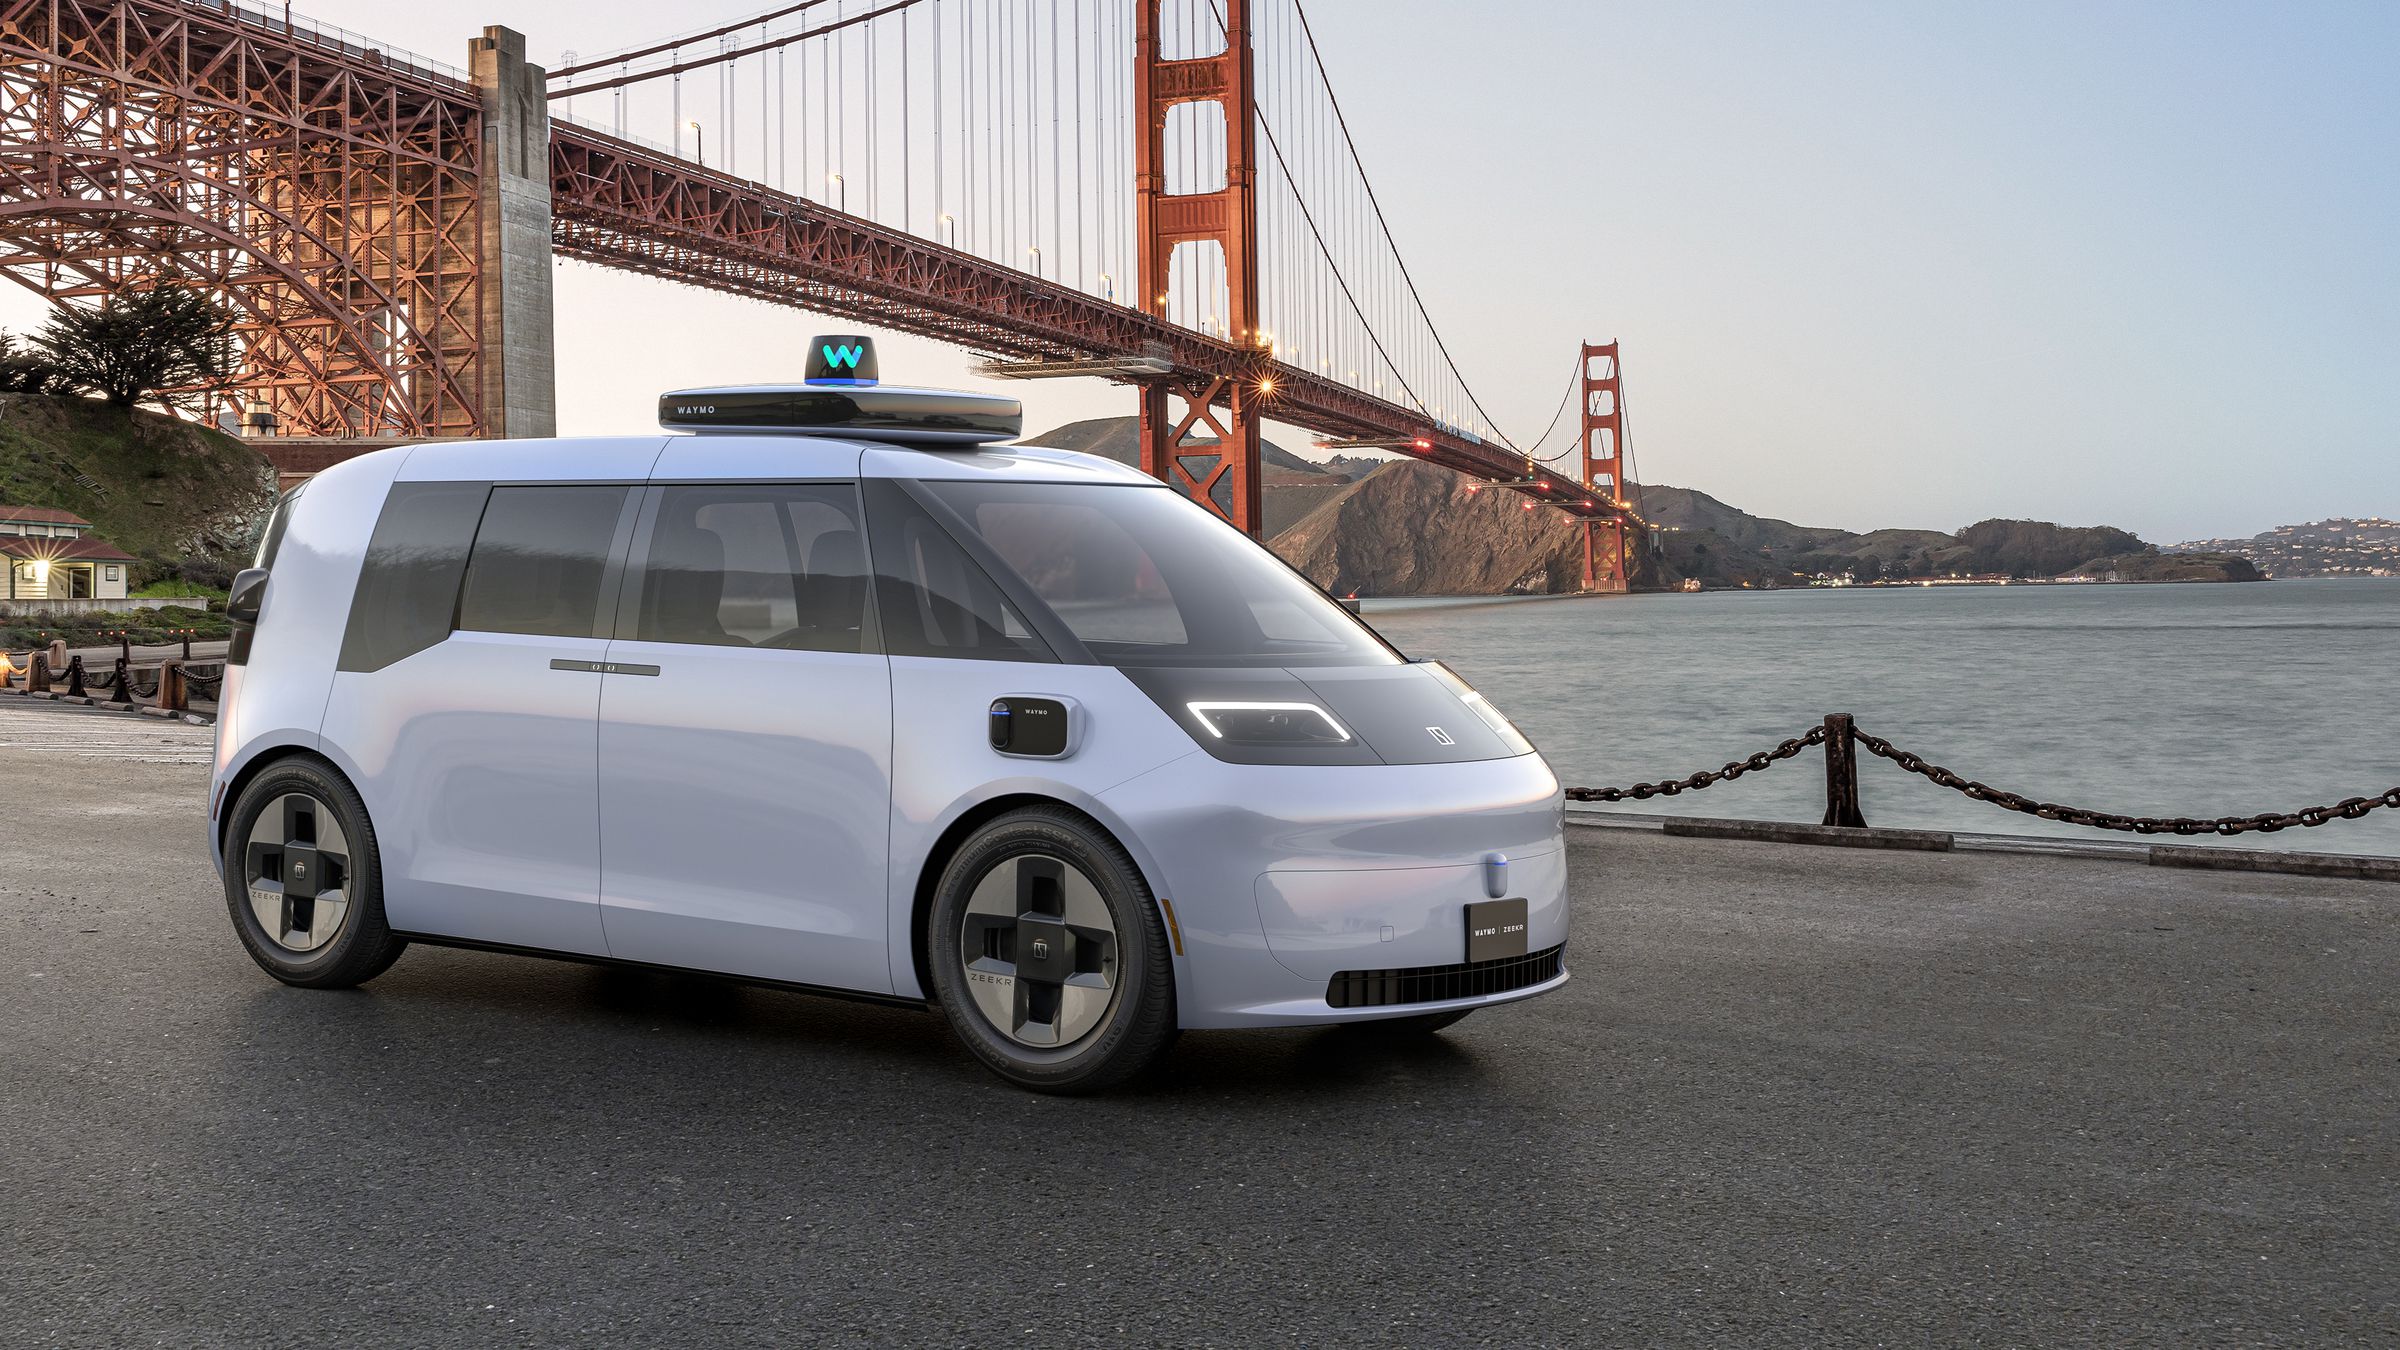 Concept images show a minivan-like vehicle designed for riders, not drivers. 